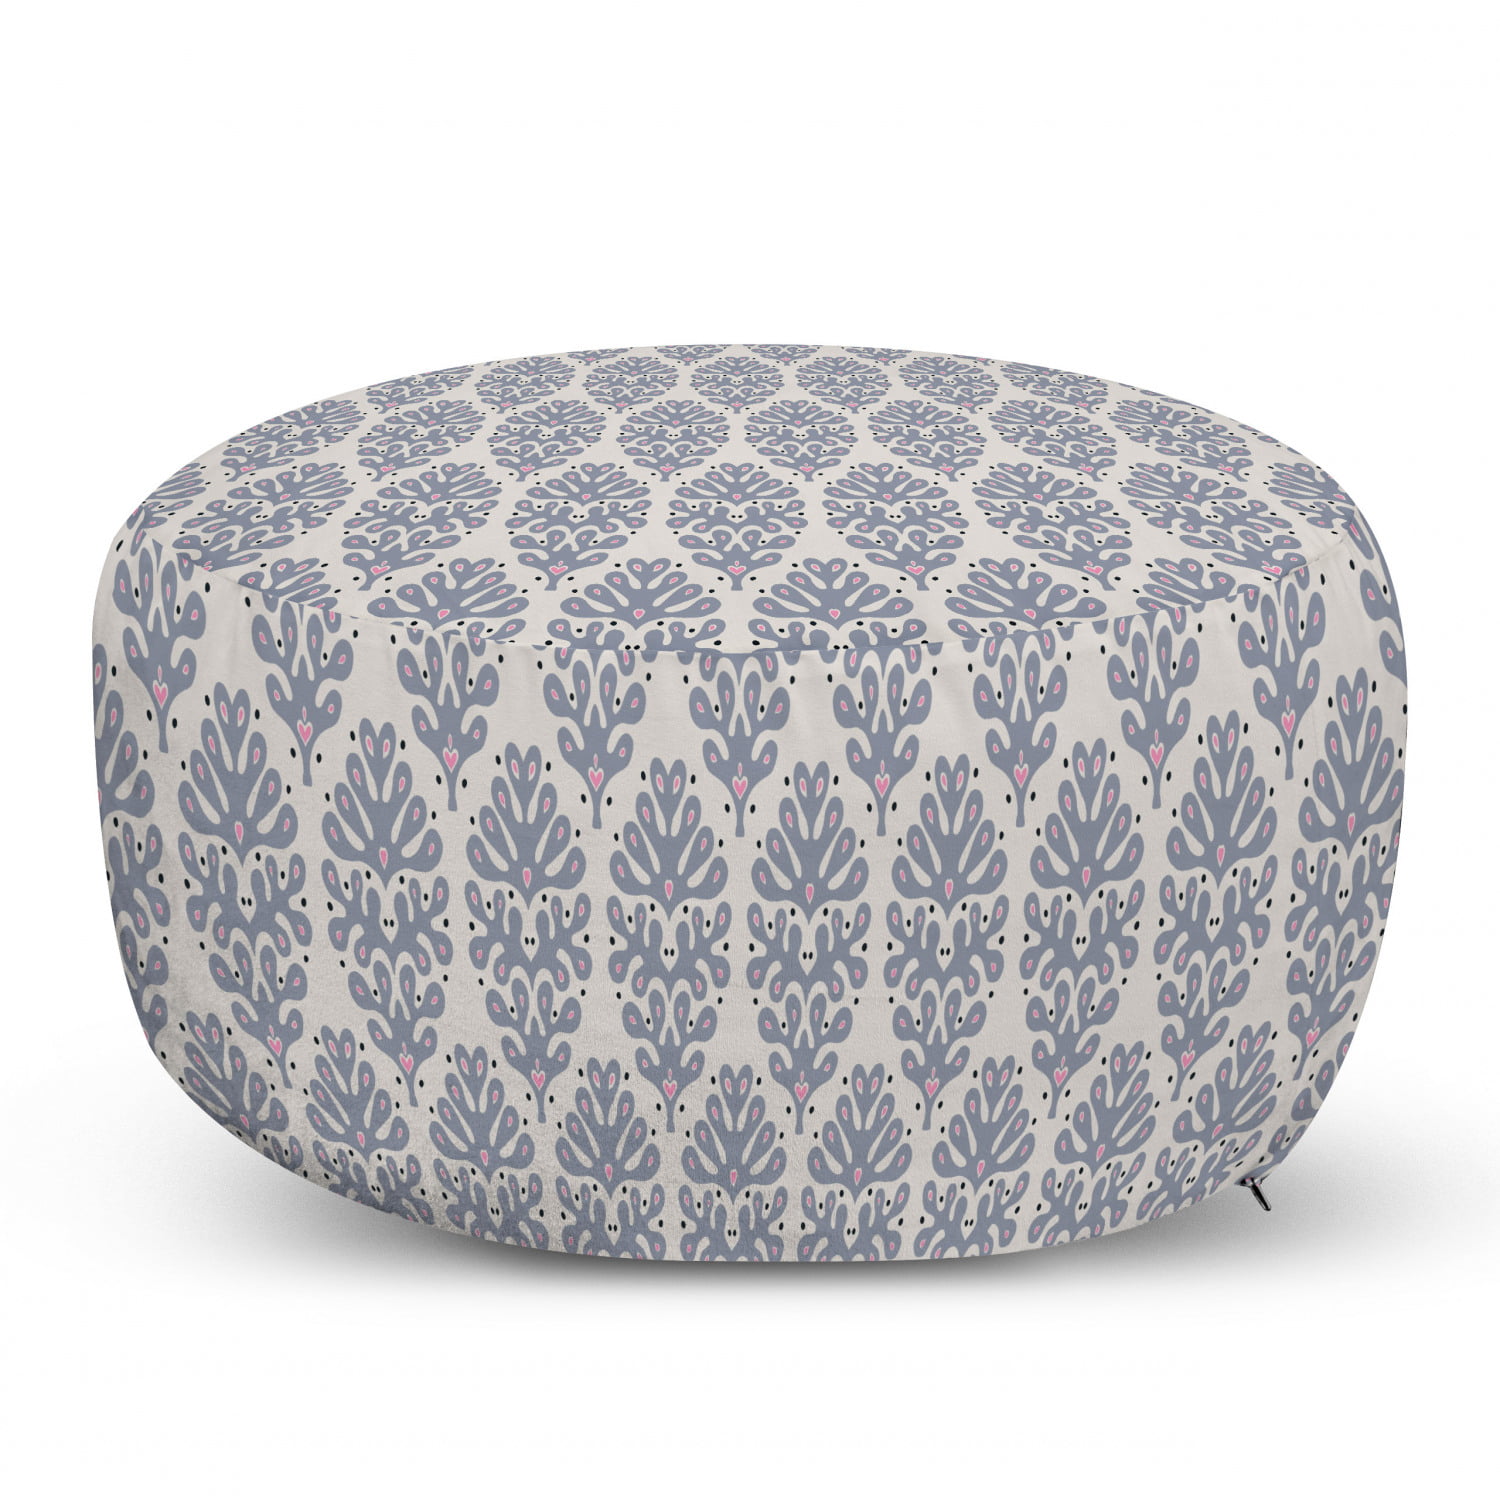 Decorative Soft Foot Rest with Removable Cover Living Room and Bedroom Ambesonne Abstract Ottoman Pouf Pale Green Blue Violet Modern Geometric Shapes Forming Circles Optical Illusion Pattern